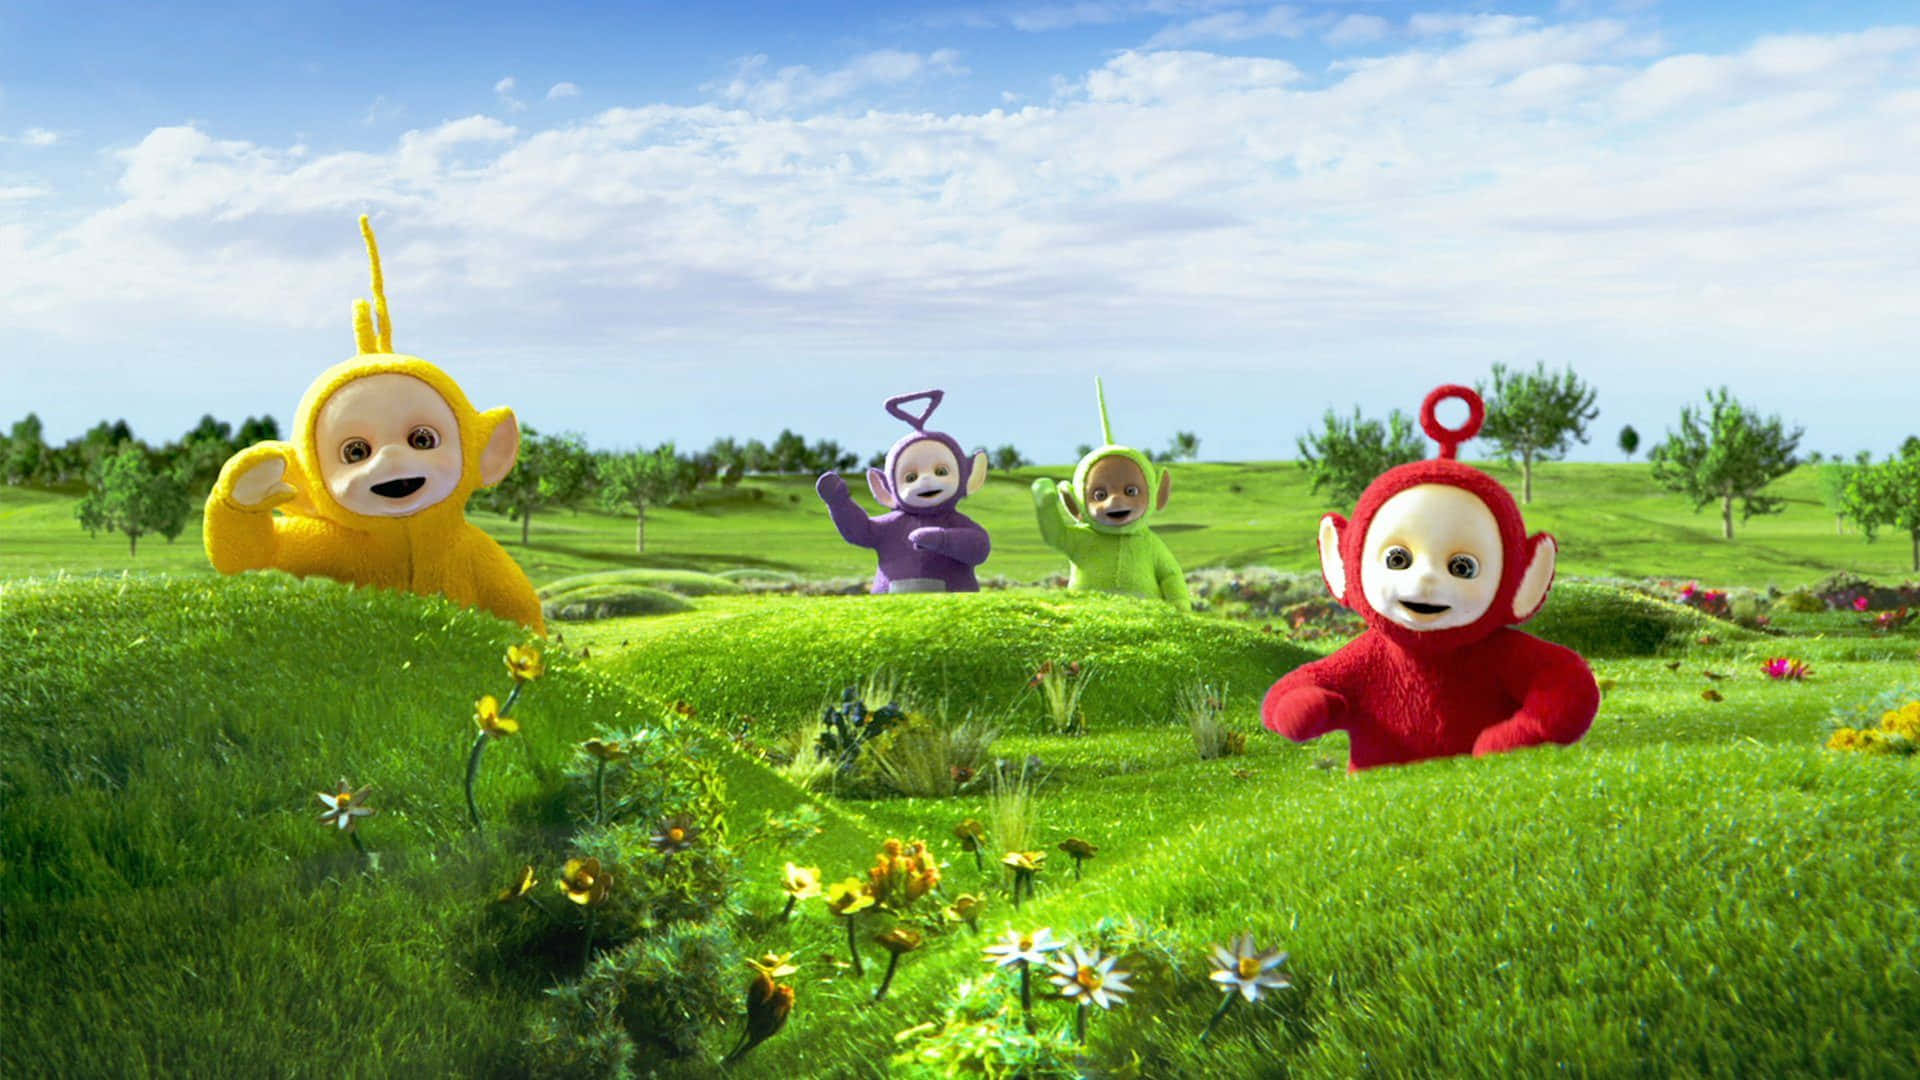 Teletubbies In The Grass